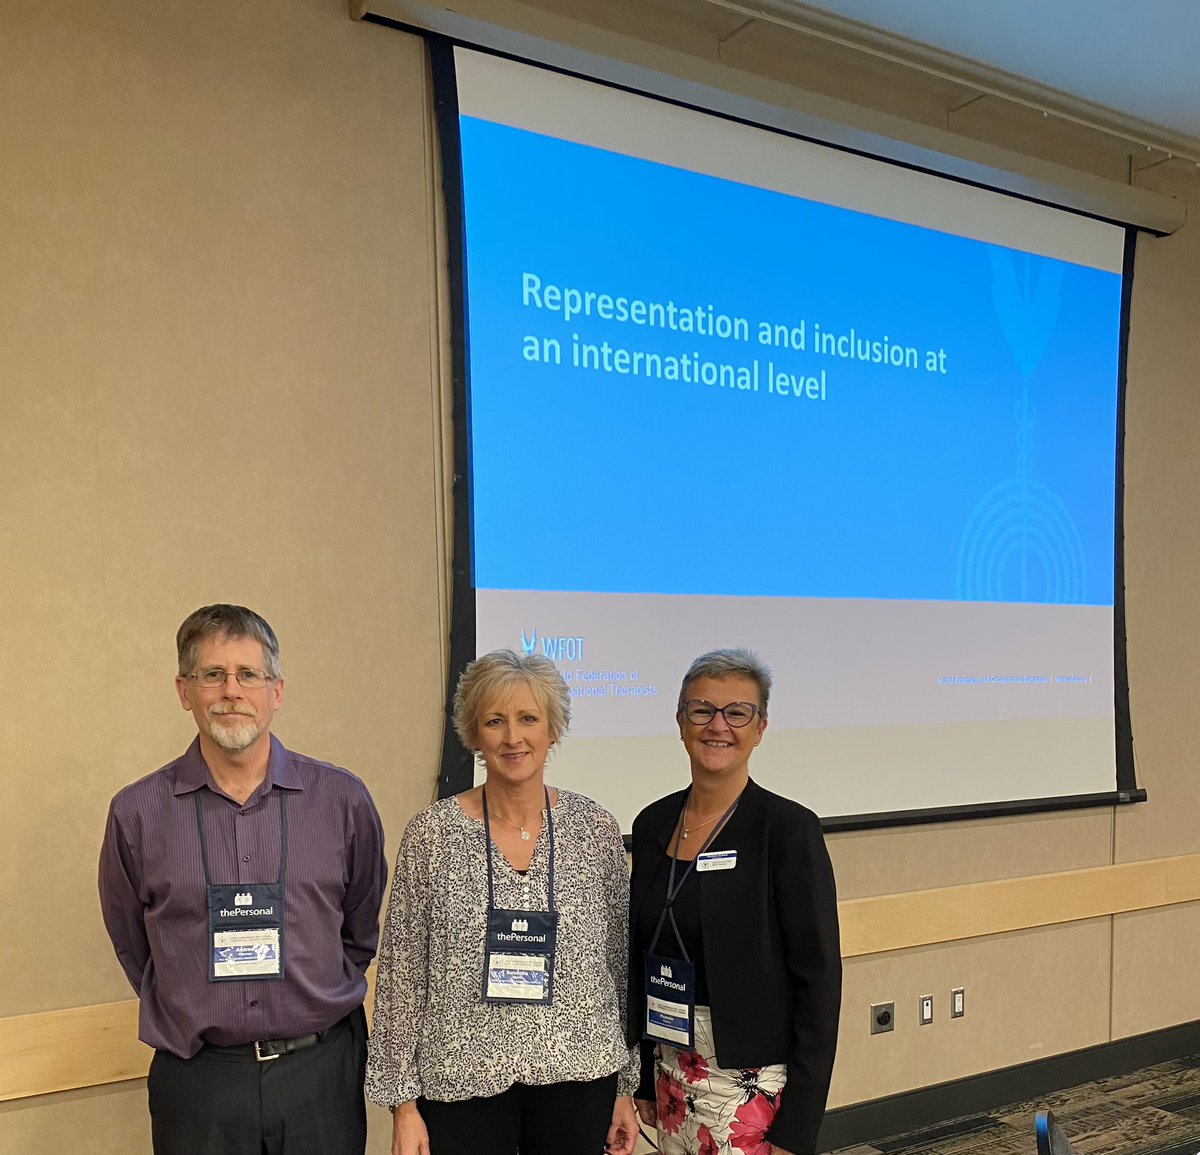 #WFOT President @otsamantha, PCo Practice Development @AndrewF02813095 & @CAOT_ACE delegate to WFOT Paulette Guitard presenting about international activities & collaborations 

#CAOT2023